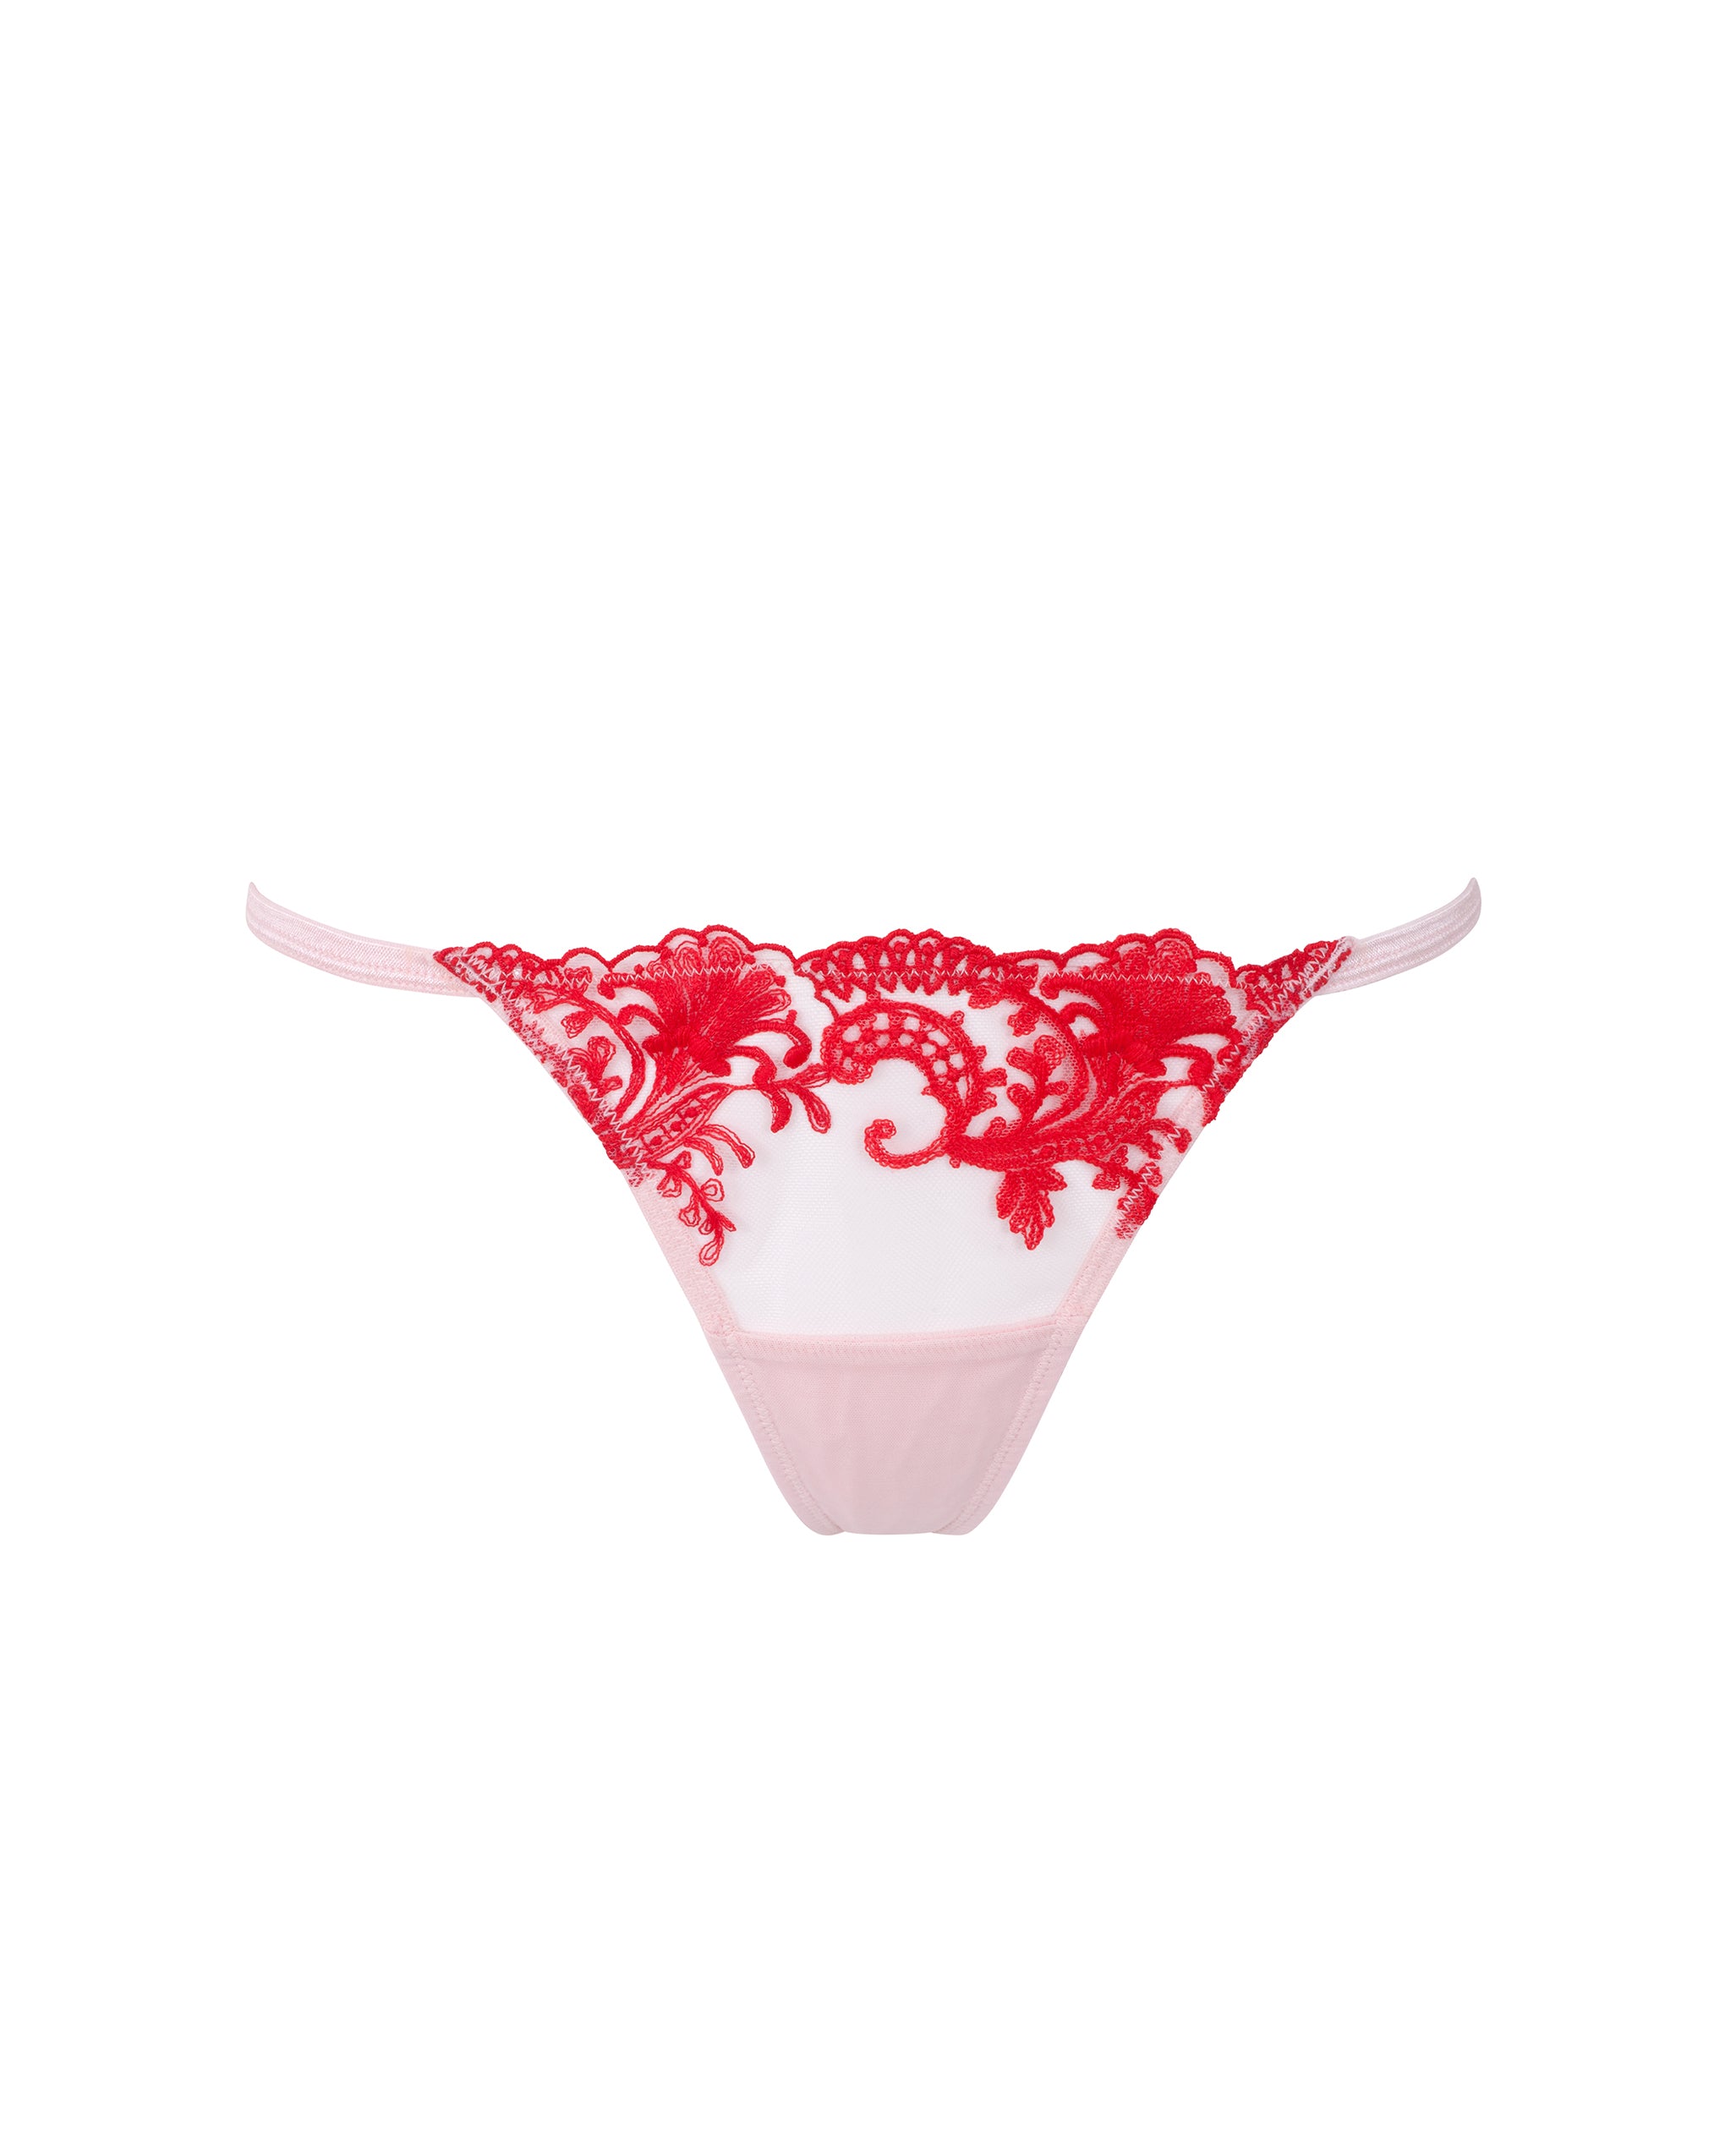 Bluebella Marseille Thong Red/Pale PInk